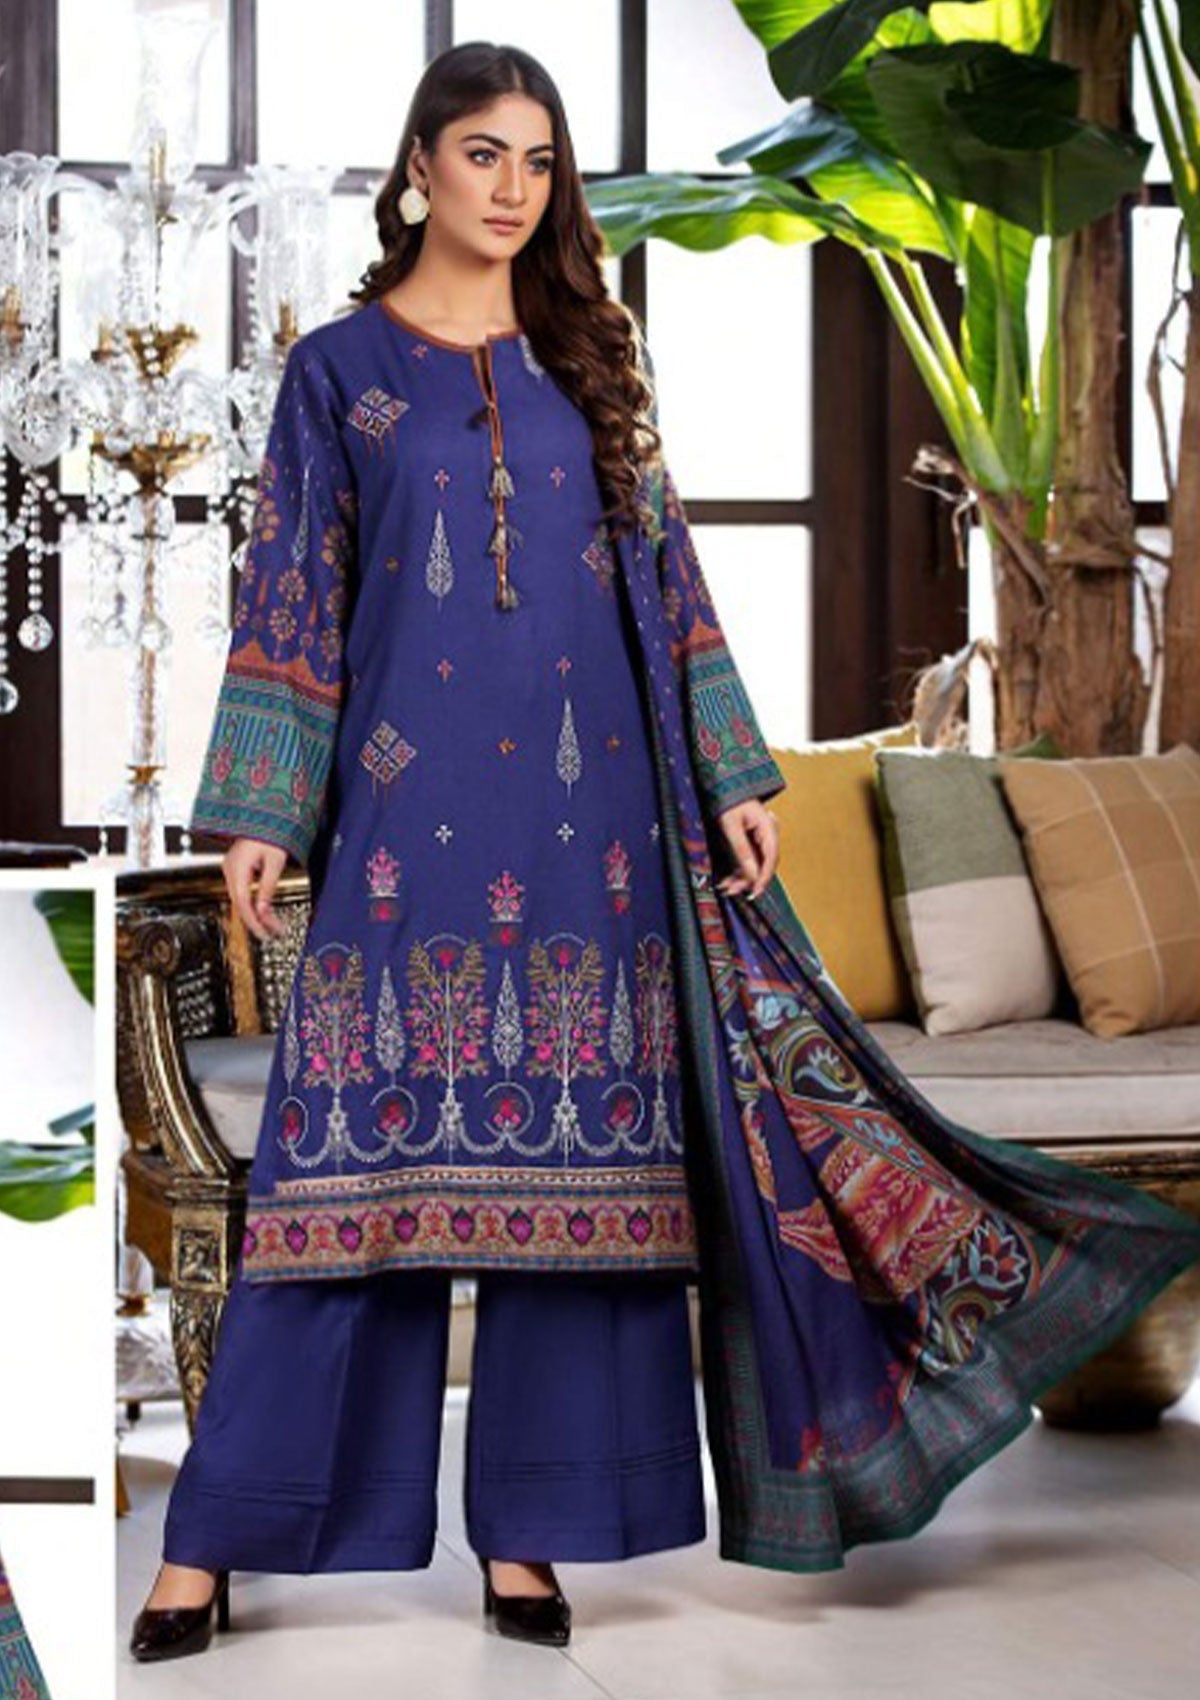 Winter Collection - Noor Jahan - Mina Hassan - D#5 available at Saleem Fabrics Traditions